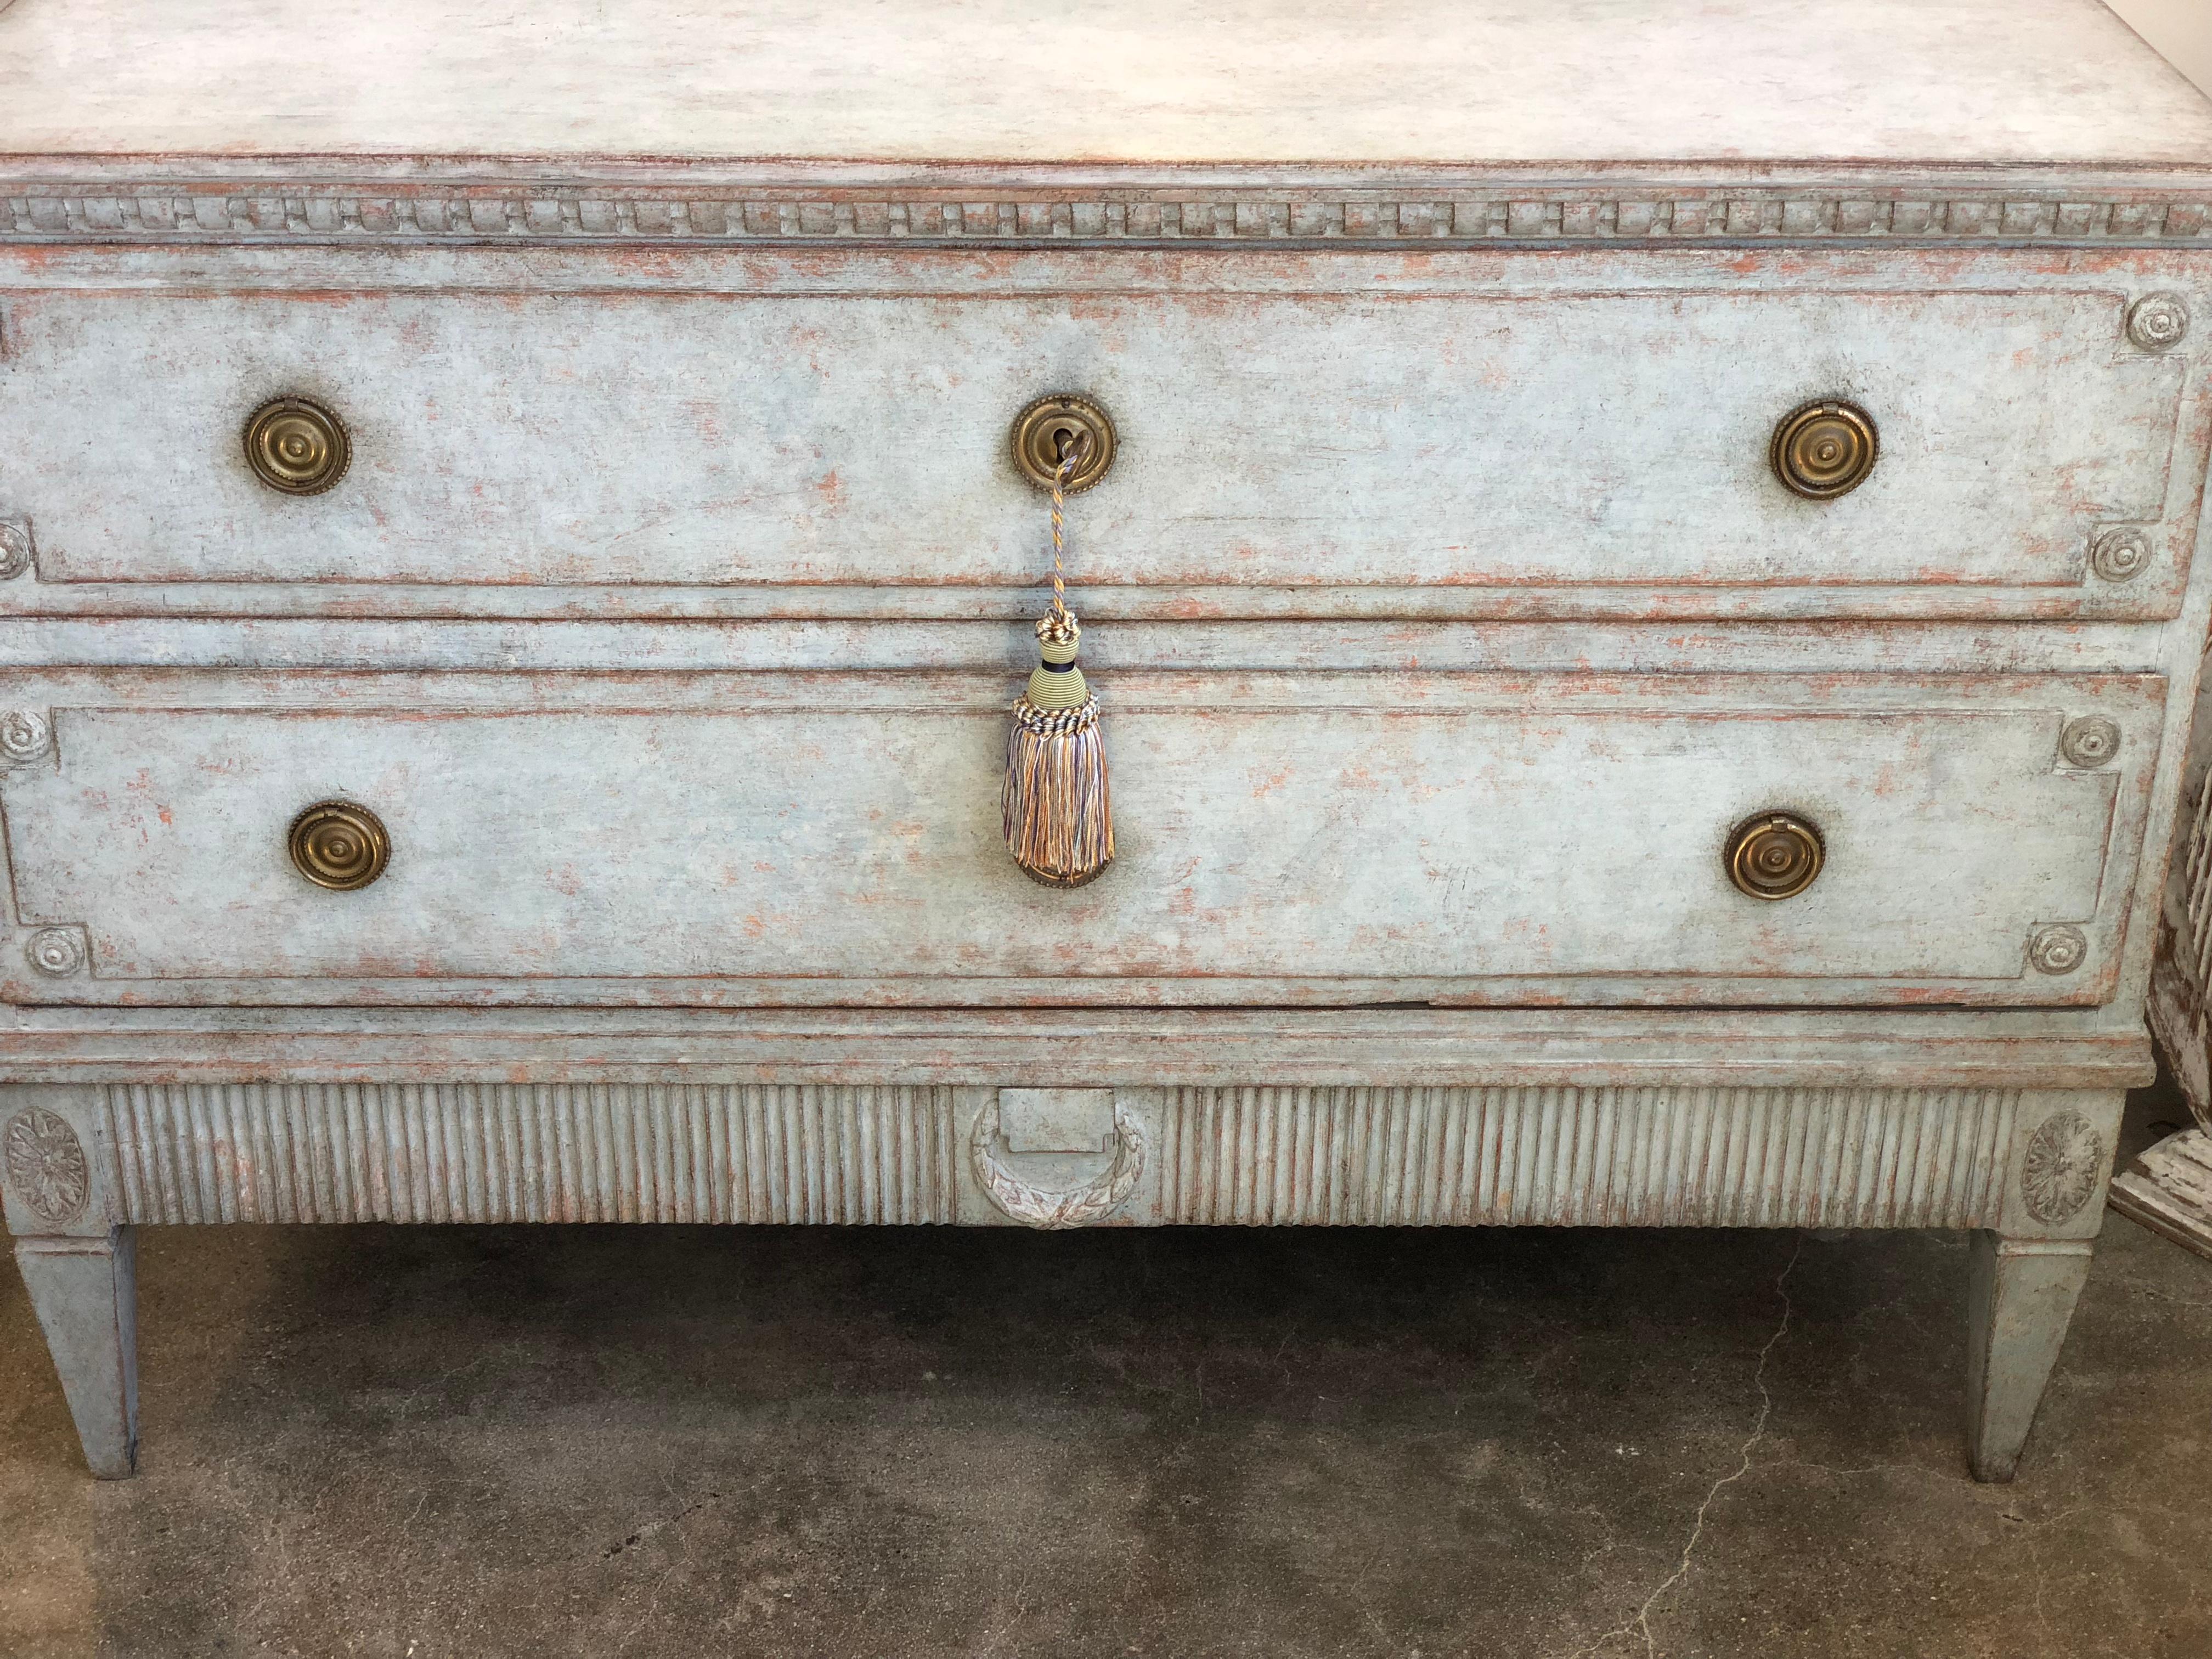 This Swedish Gustavian chest is as pretty as they come! 19th century. Gorgeous pale blue patina color. Sturdy condition with clean hardware. It has pretty dentil detail on top and base has ribbing with a laurel wreath centre relief. Base can be